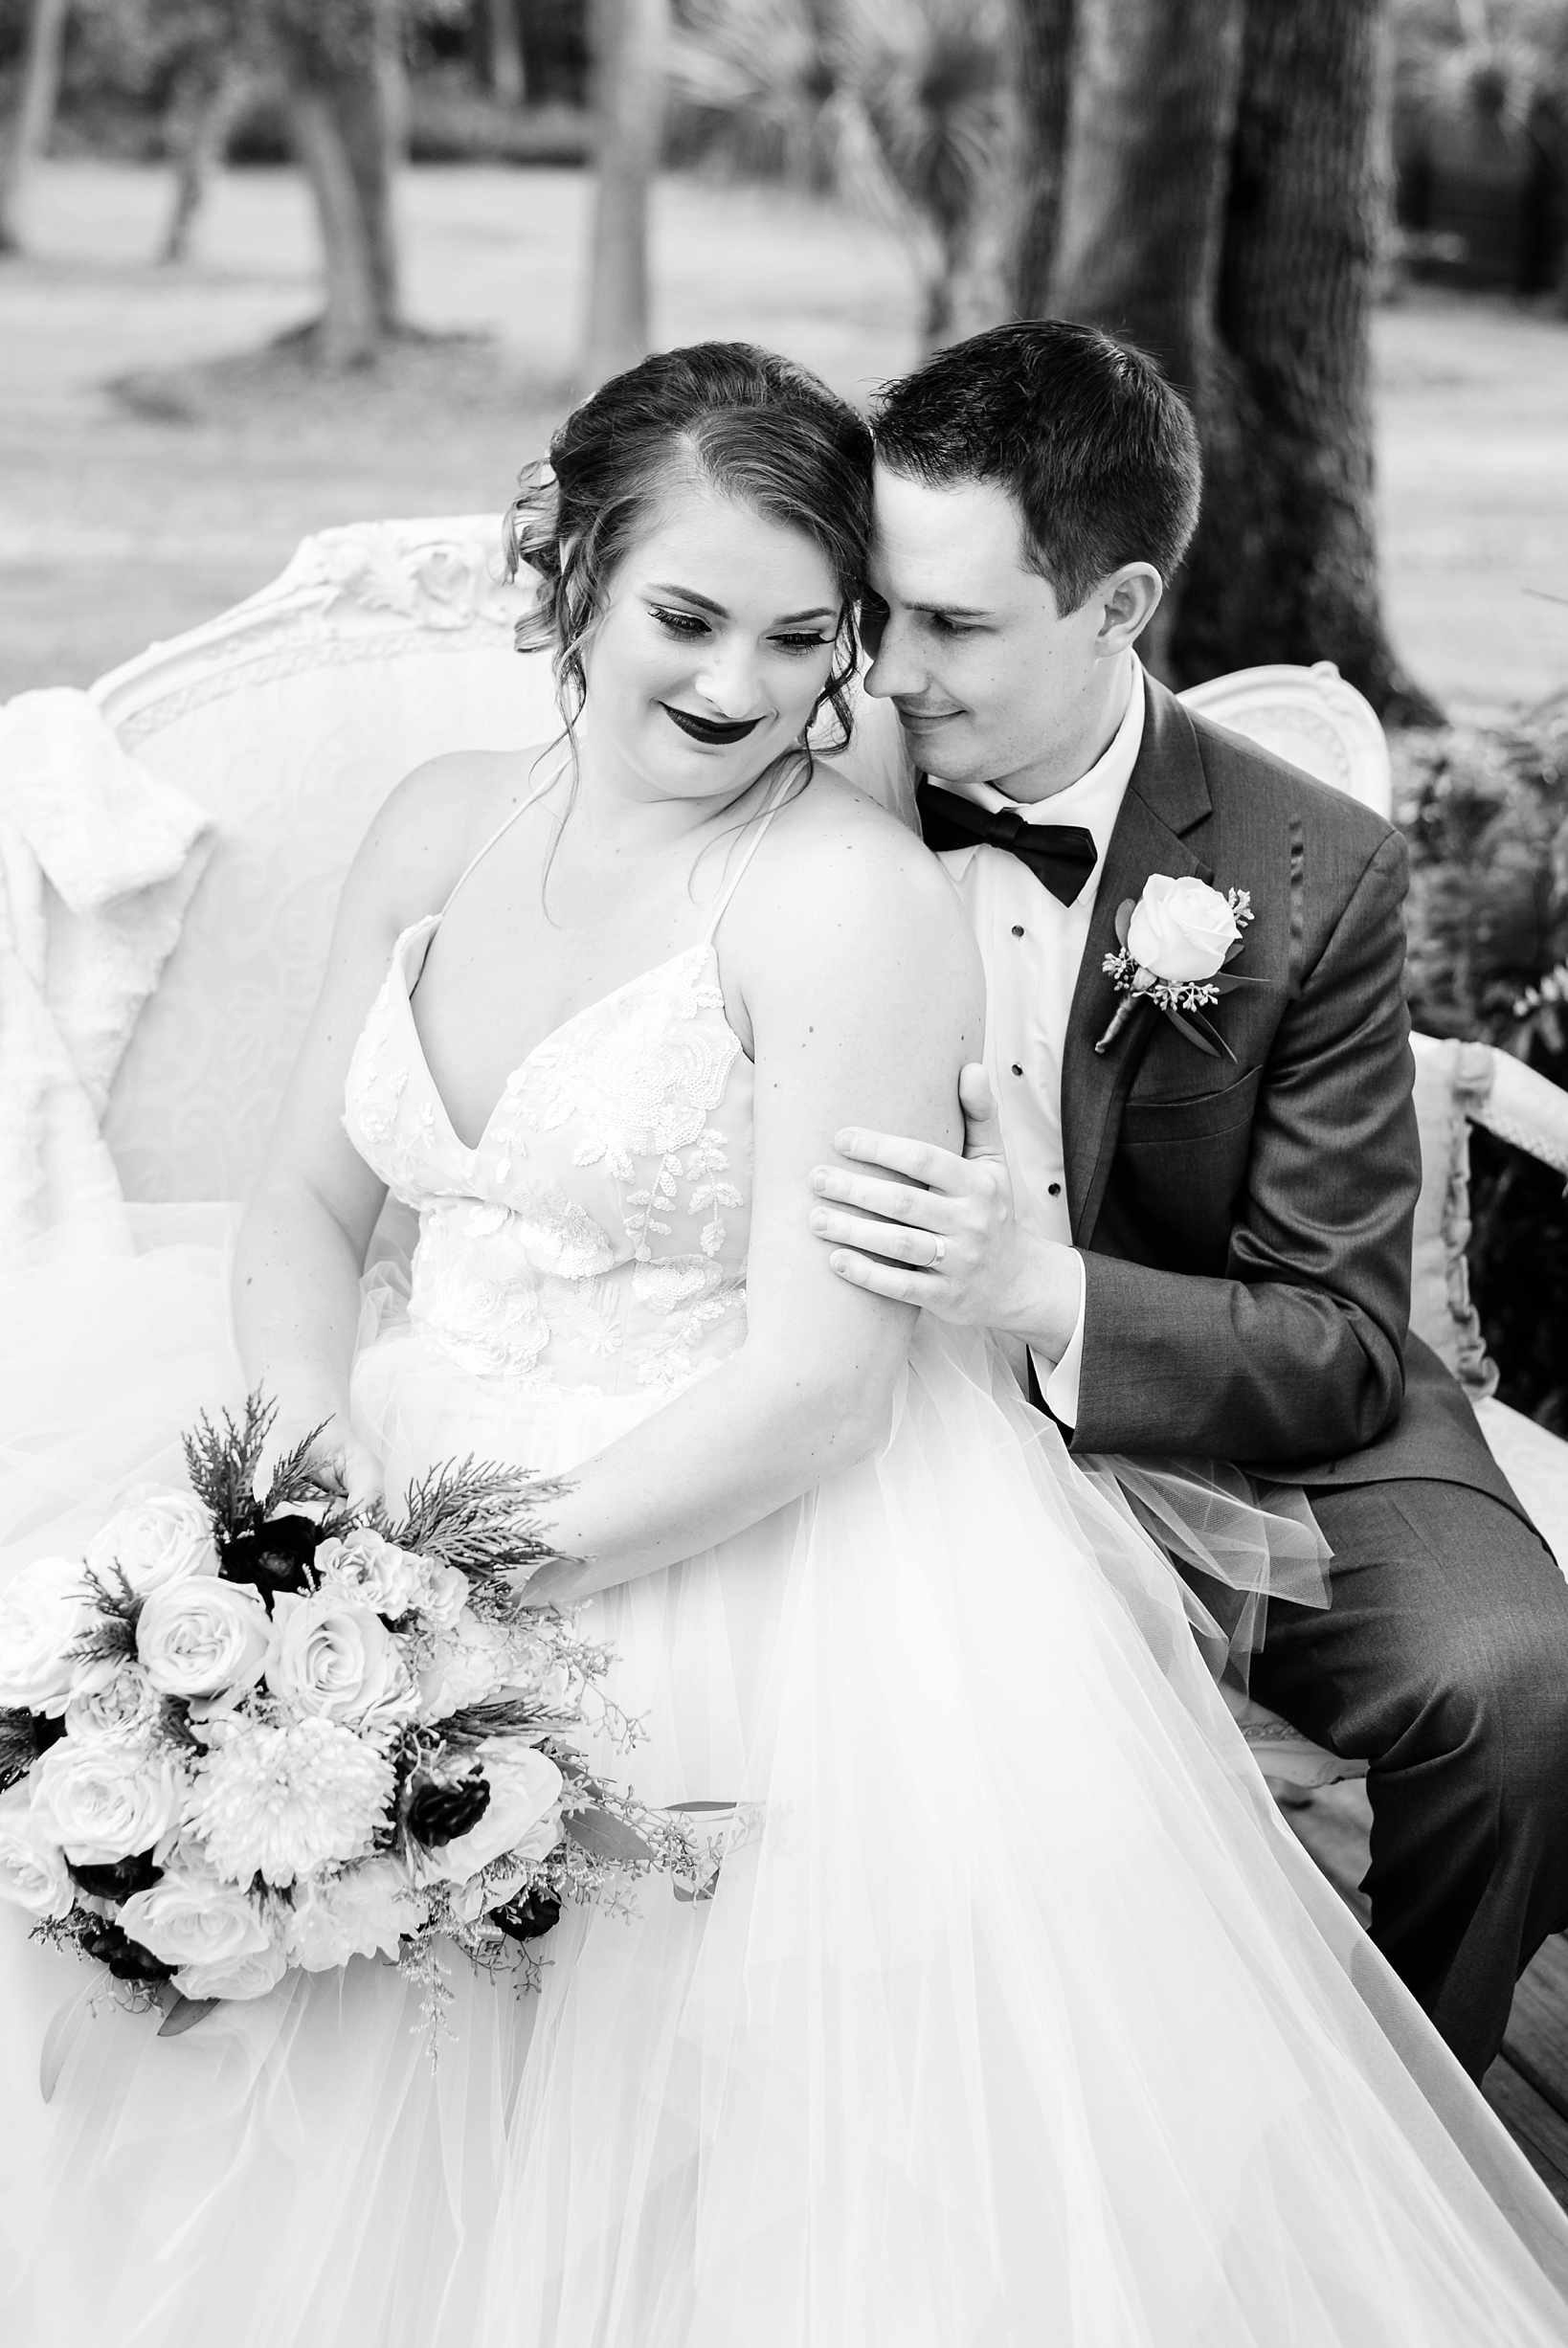 Bride and Groom in black and white sharing a quiet moment together after their ceremony